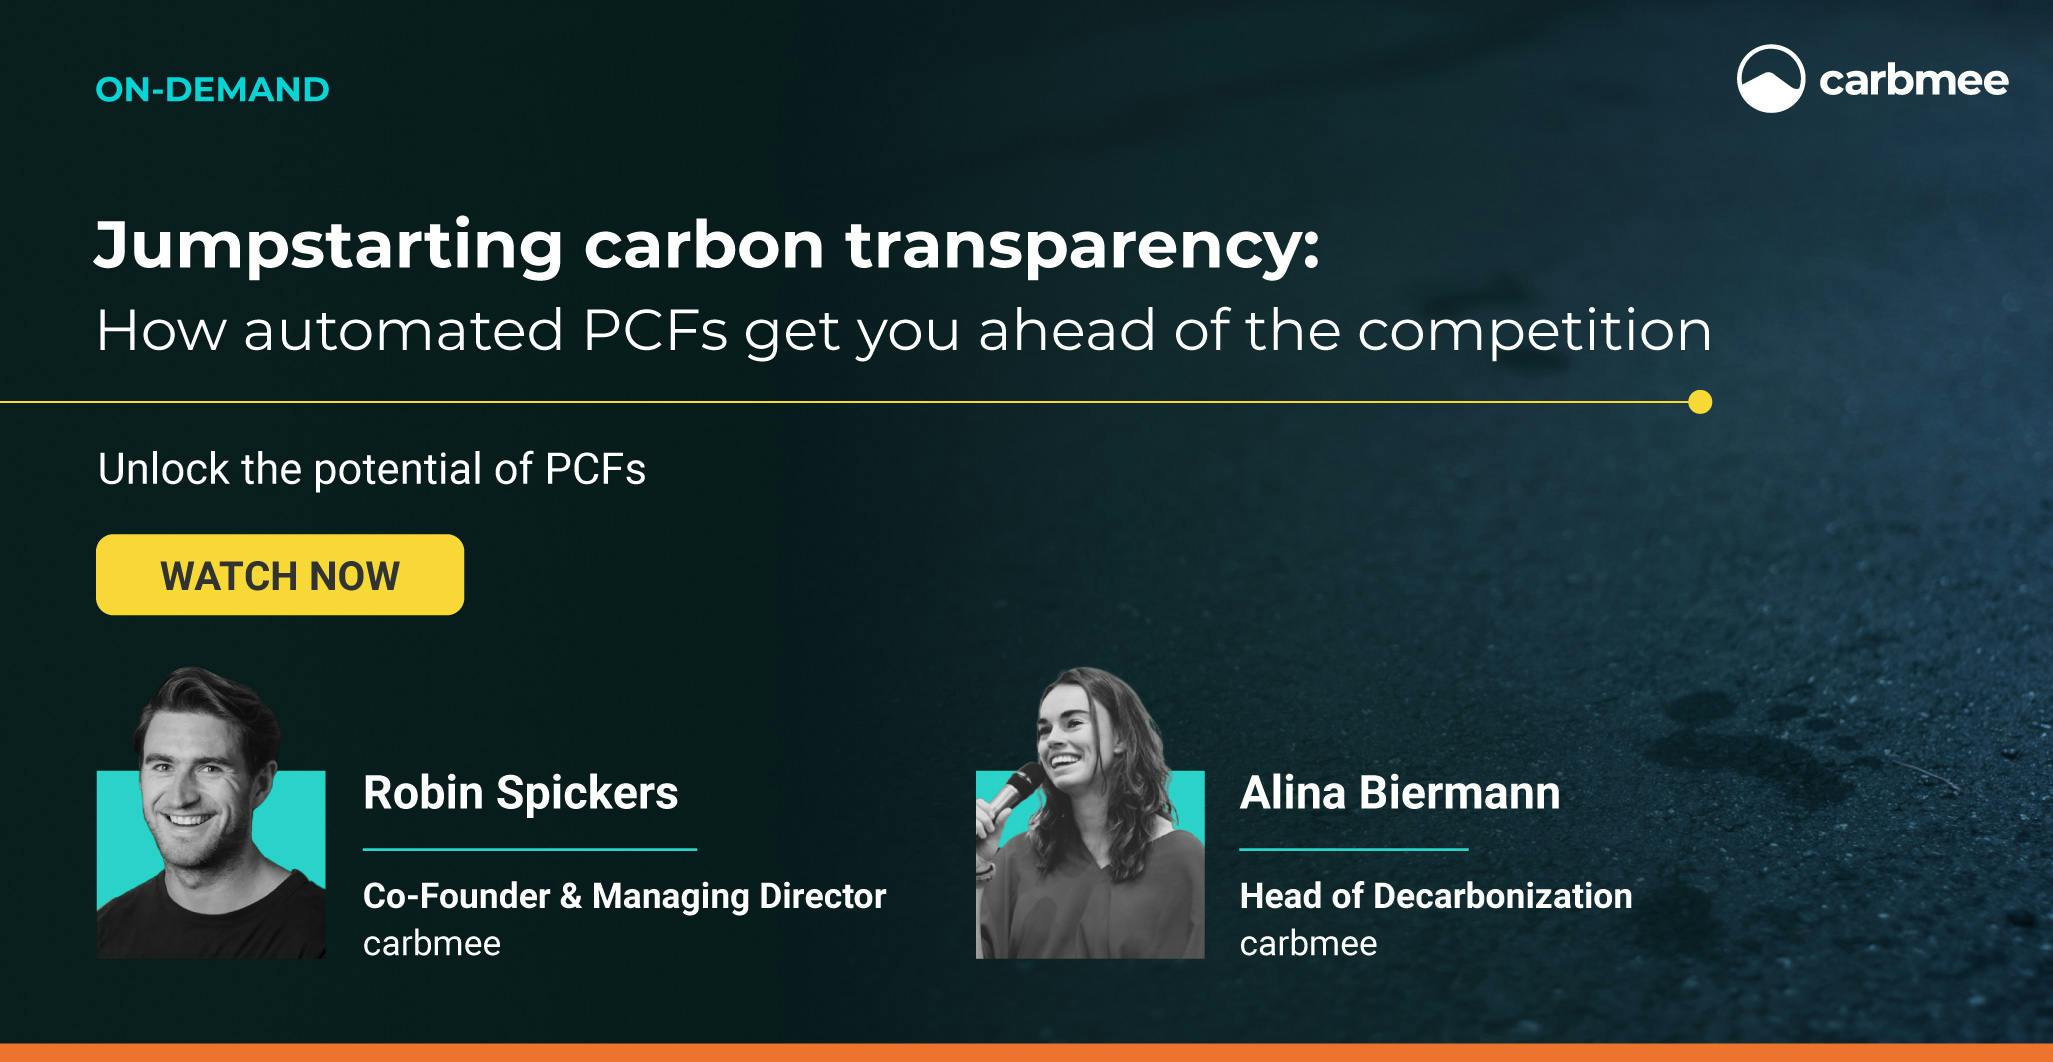 Jumpstarting carbon transparency: How automated PCFs get you ahead of the competition